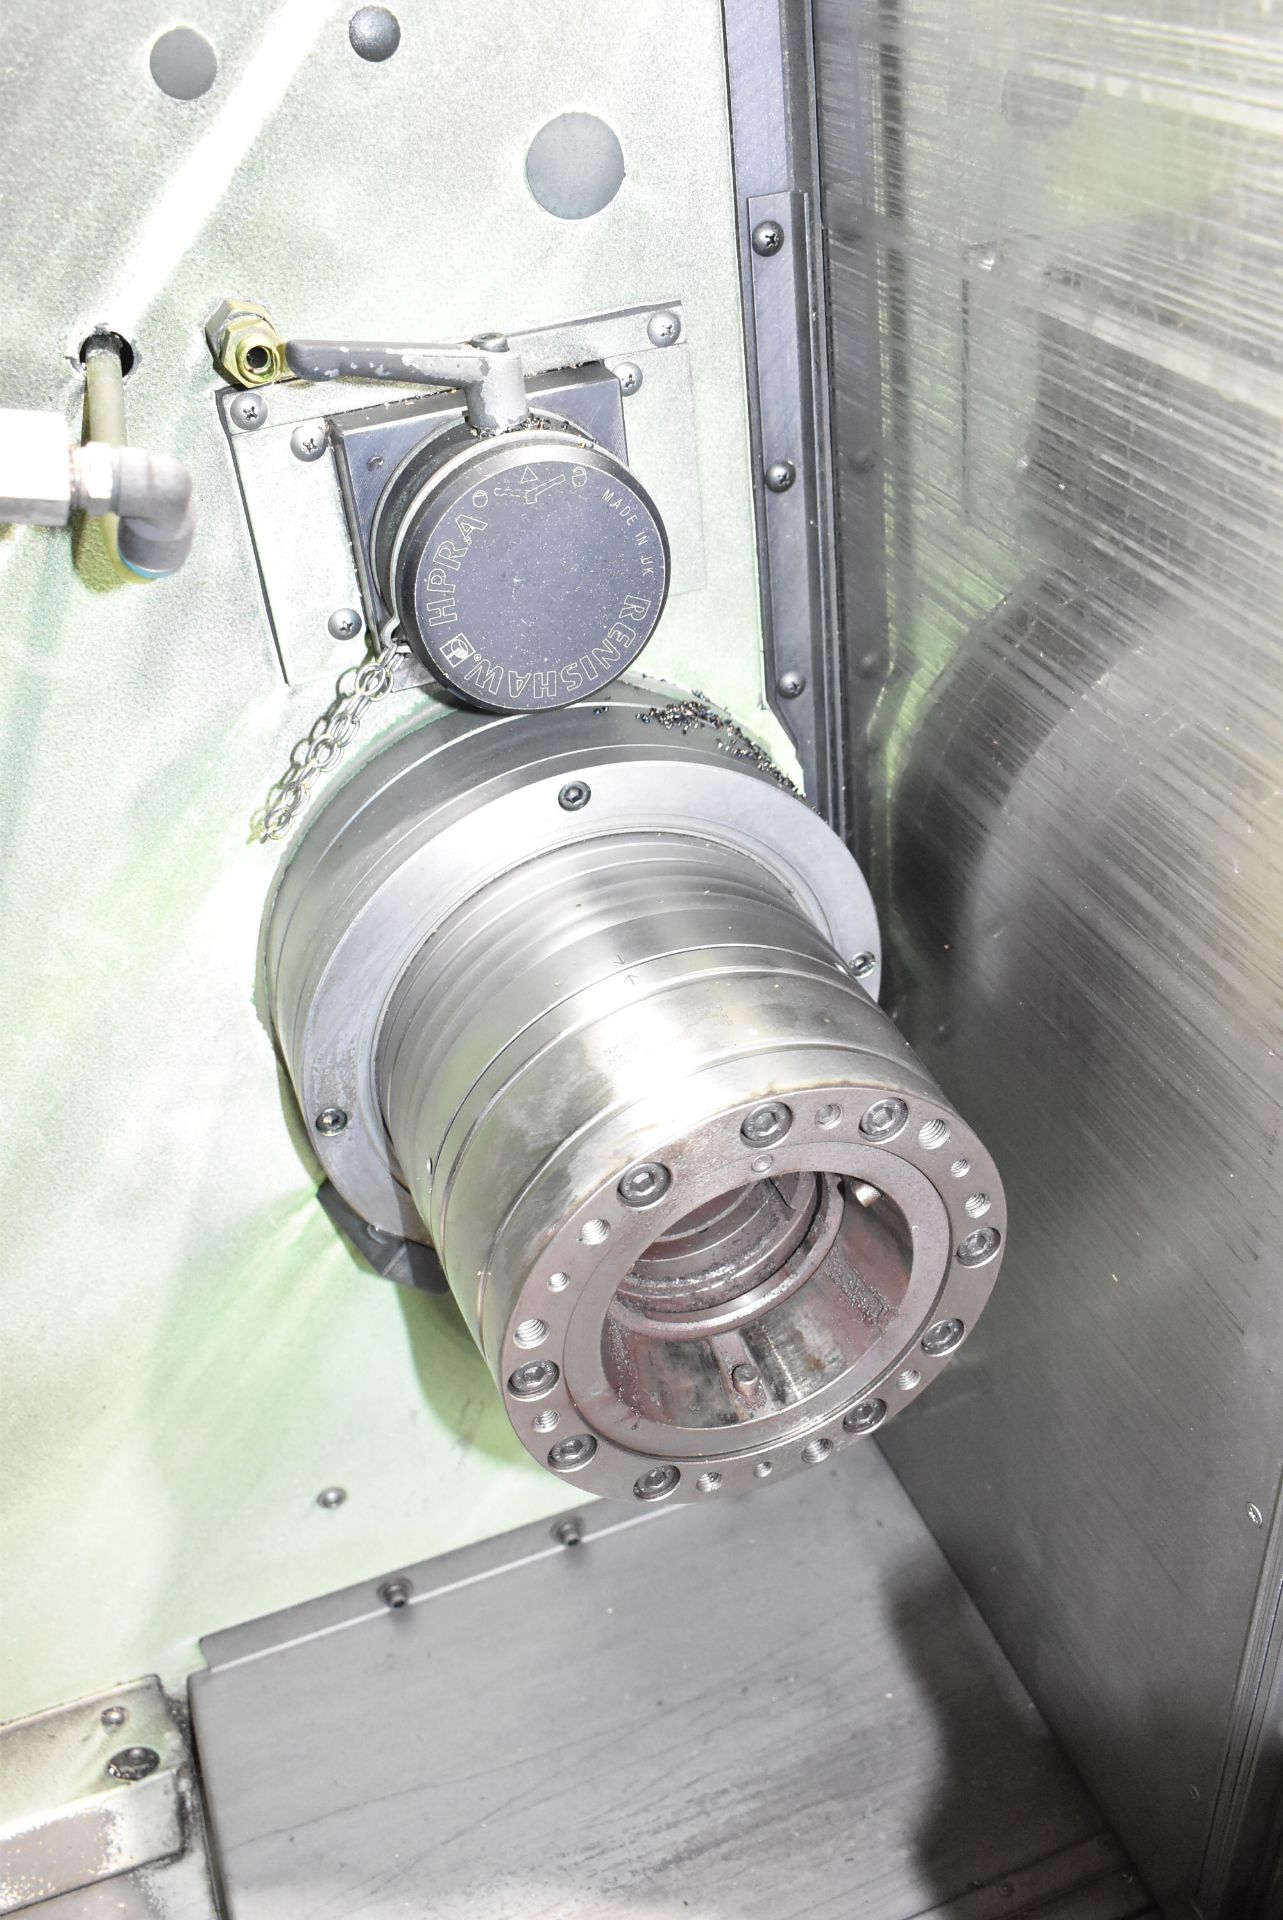 NAKAMURA-TOME (2013) WT-250 II S MULTI-AXIS OPPOSED SPINDLE AND TWIN TURRET CNC MULTI-TASKING CENTER - Image 2 of 15